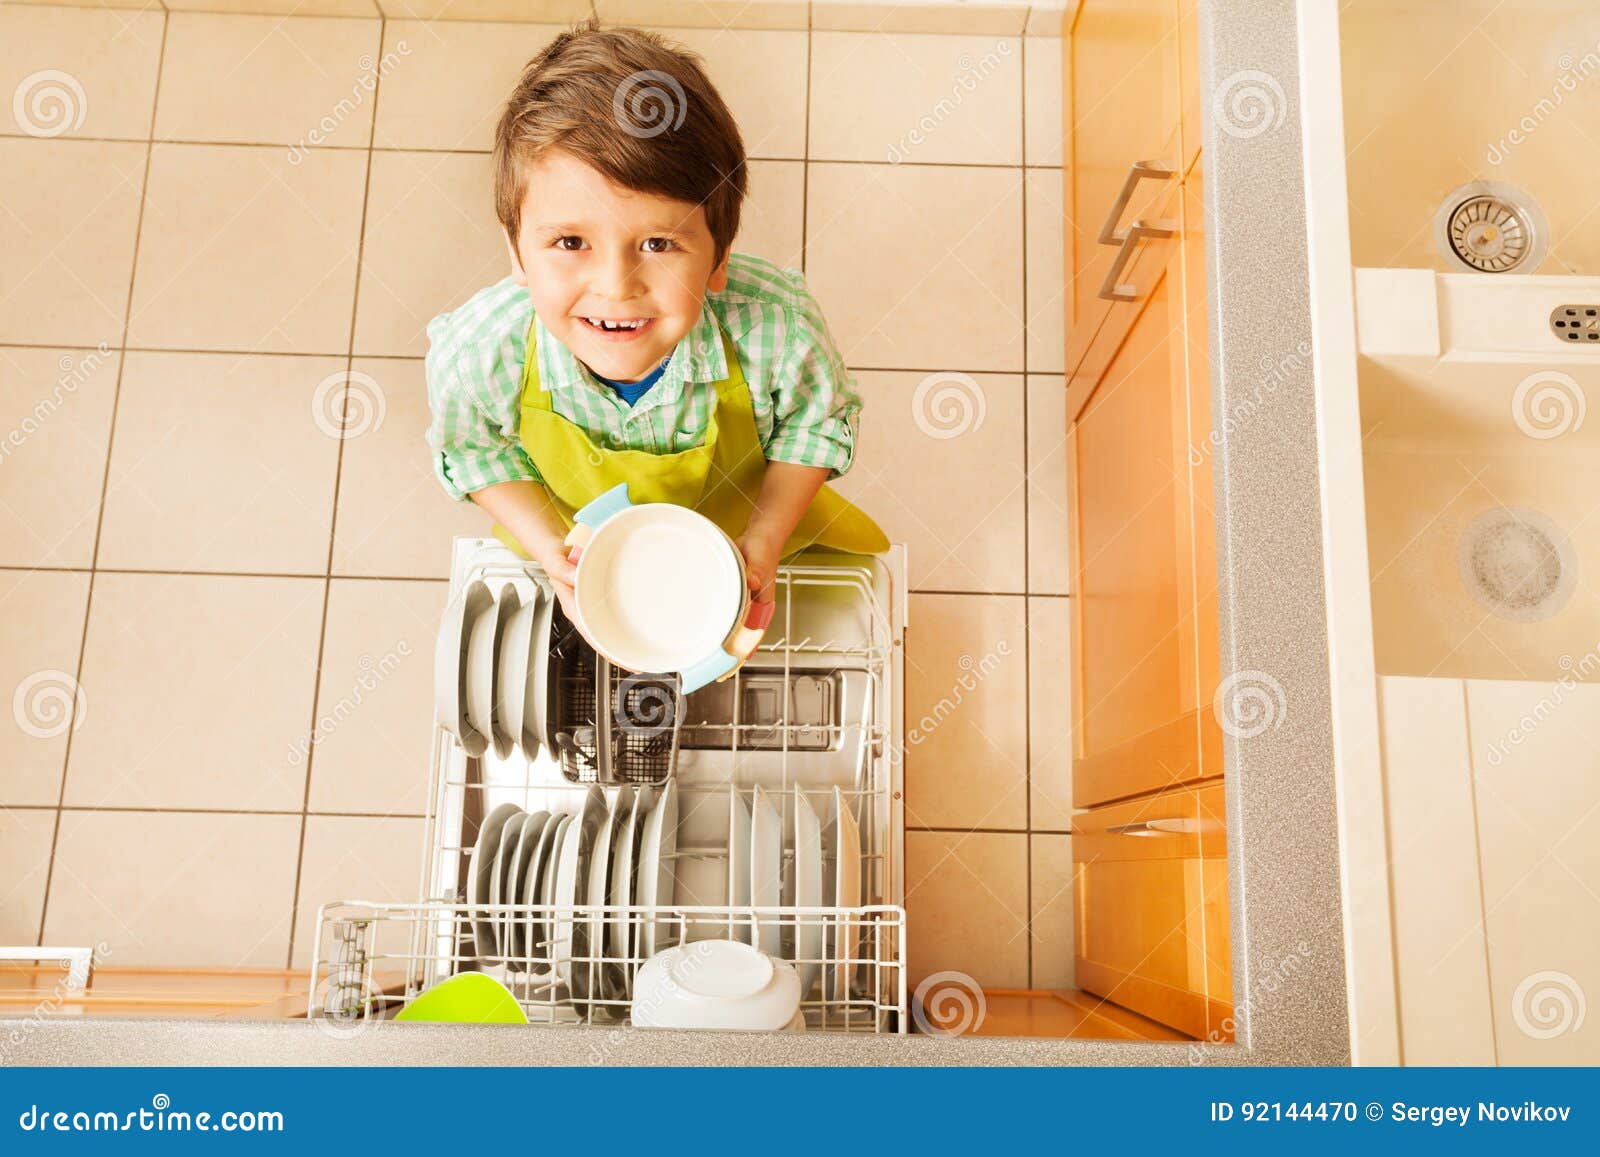 happy kid boy taking out dishes from dishwasher